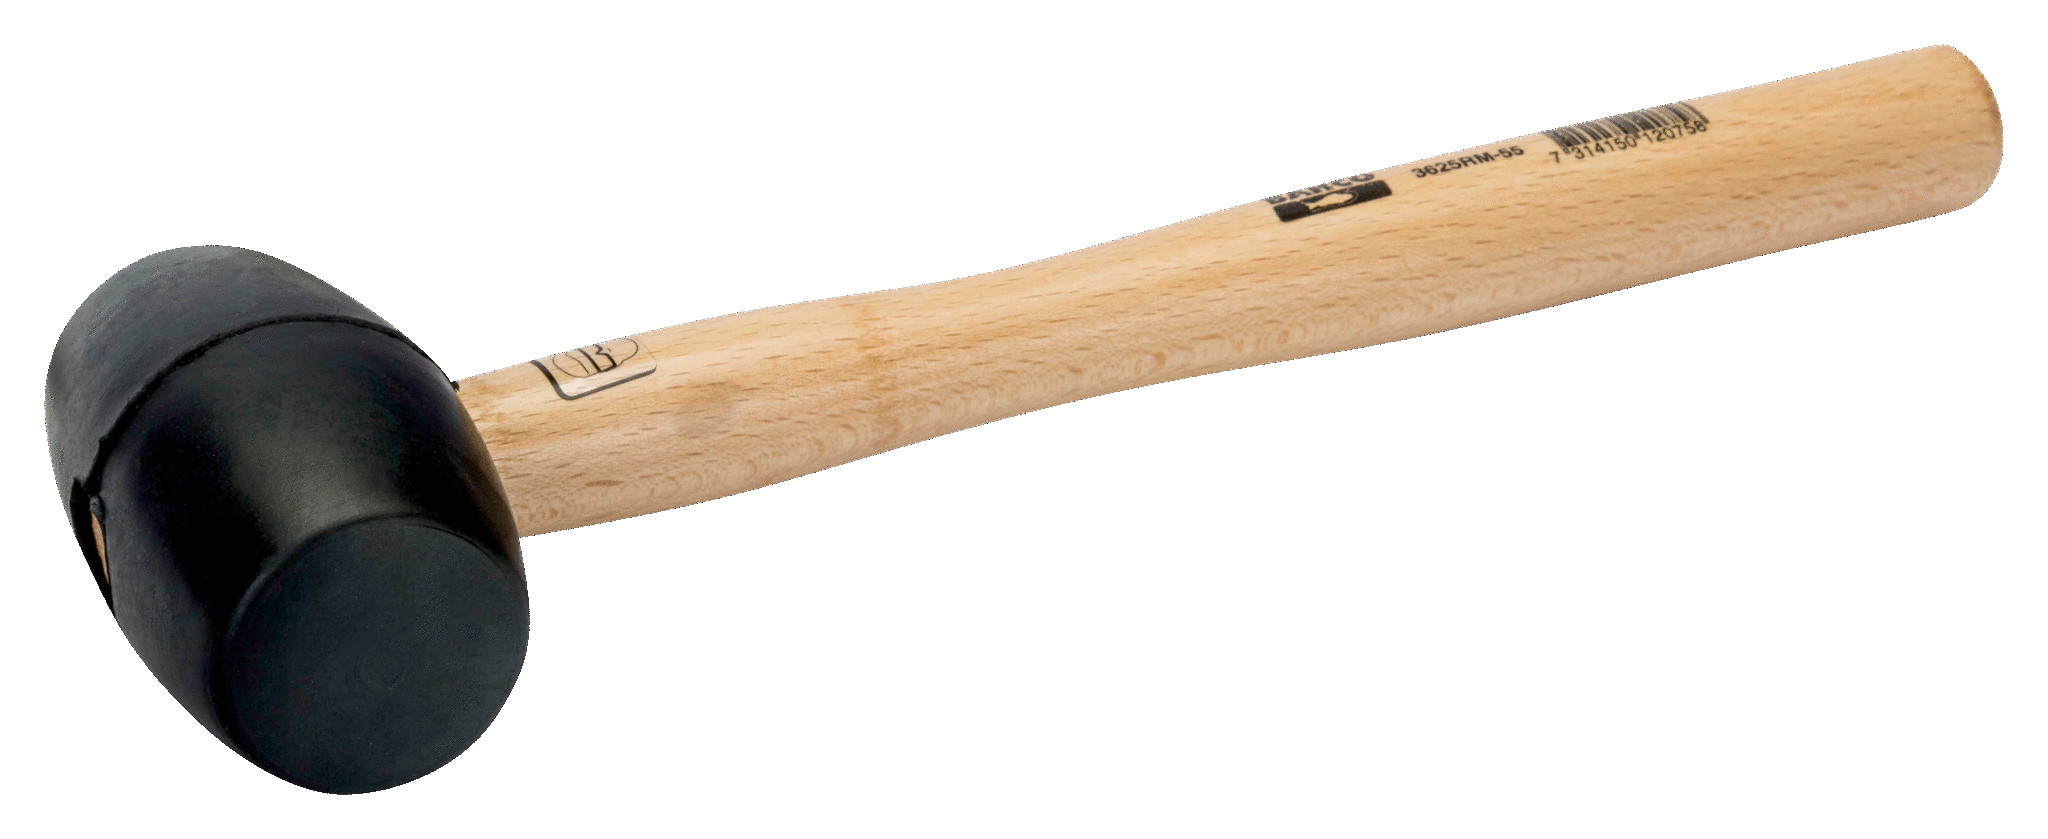 Mallets Rubber Mallets with Wooden Handle | BAHCO | Bahco International